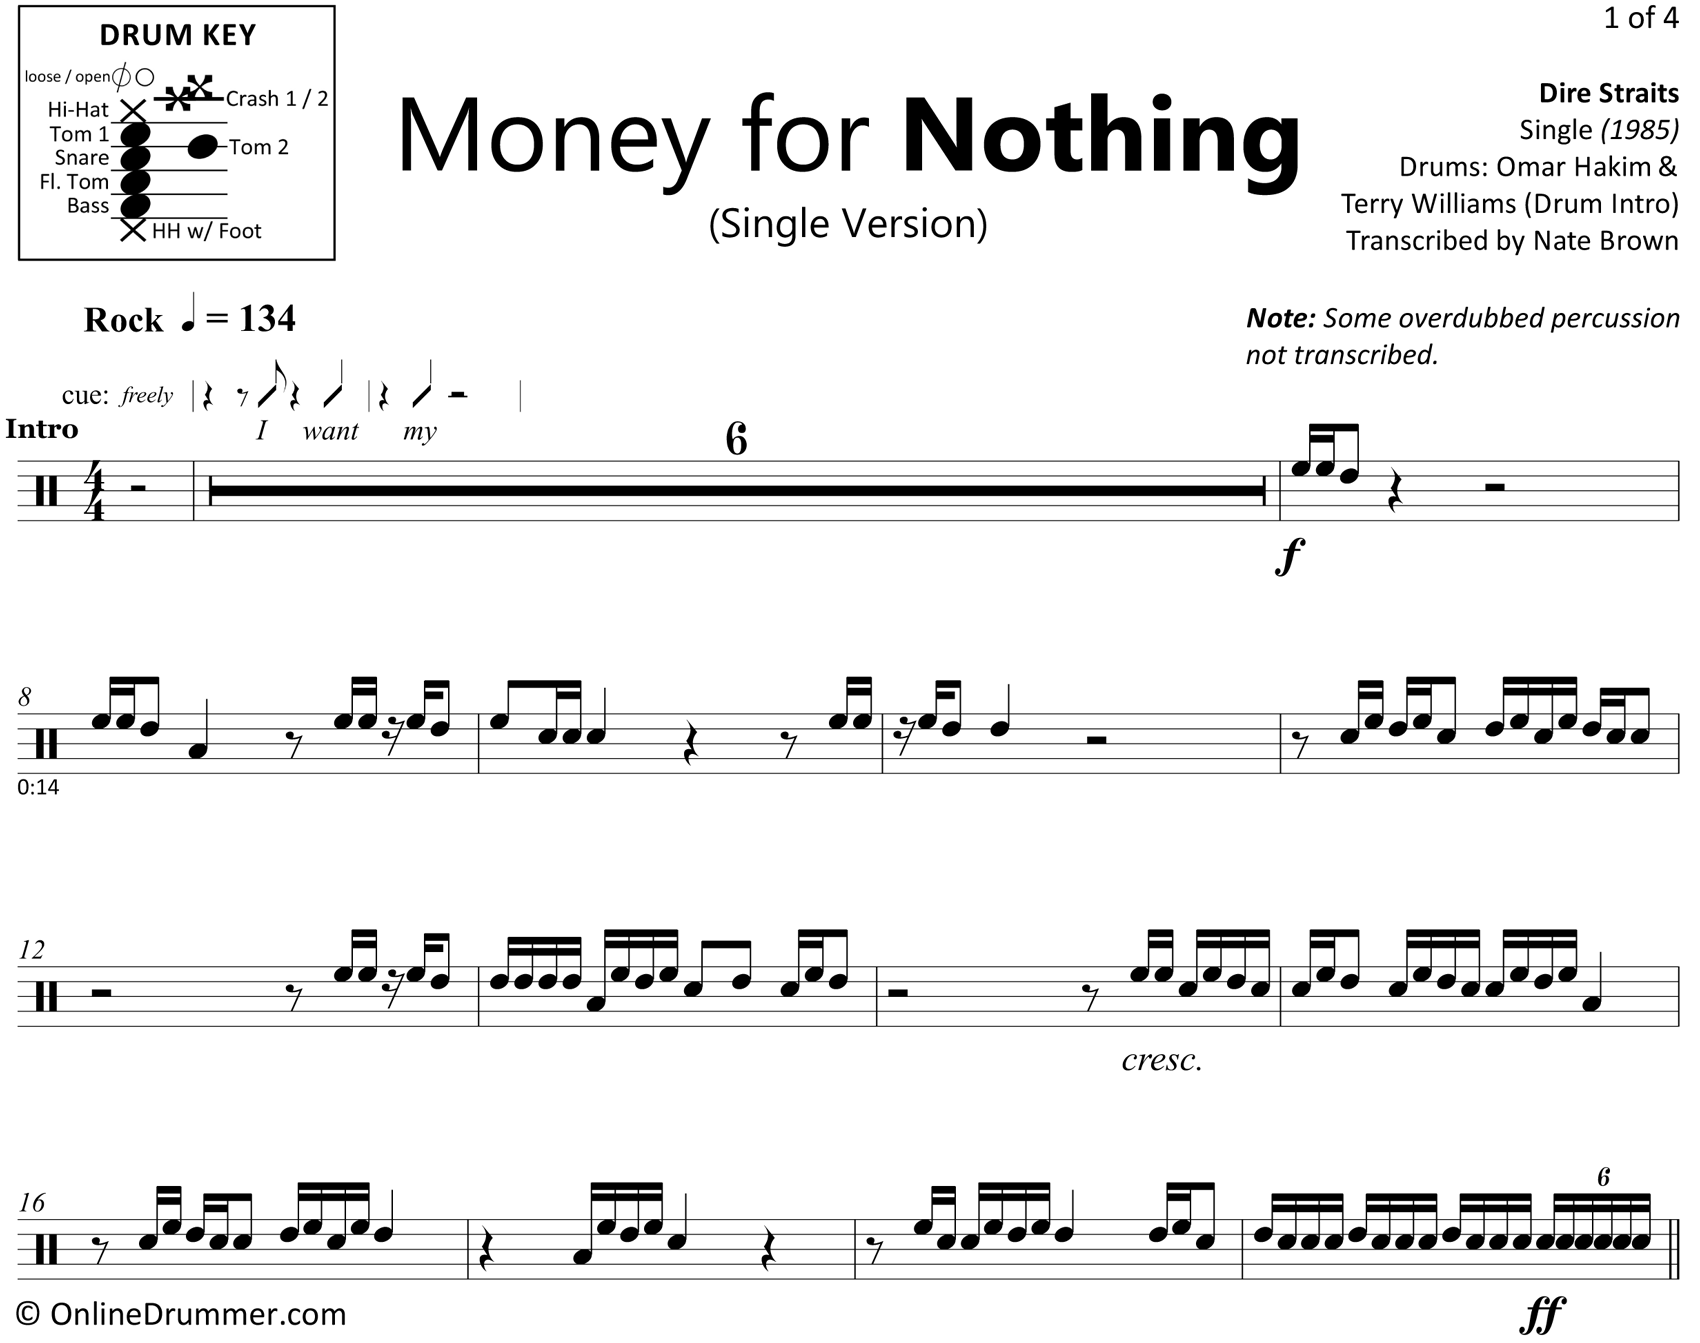 Money For Nothing - Dire Straits - Drum Sheet Music